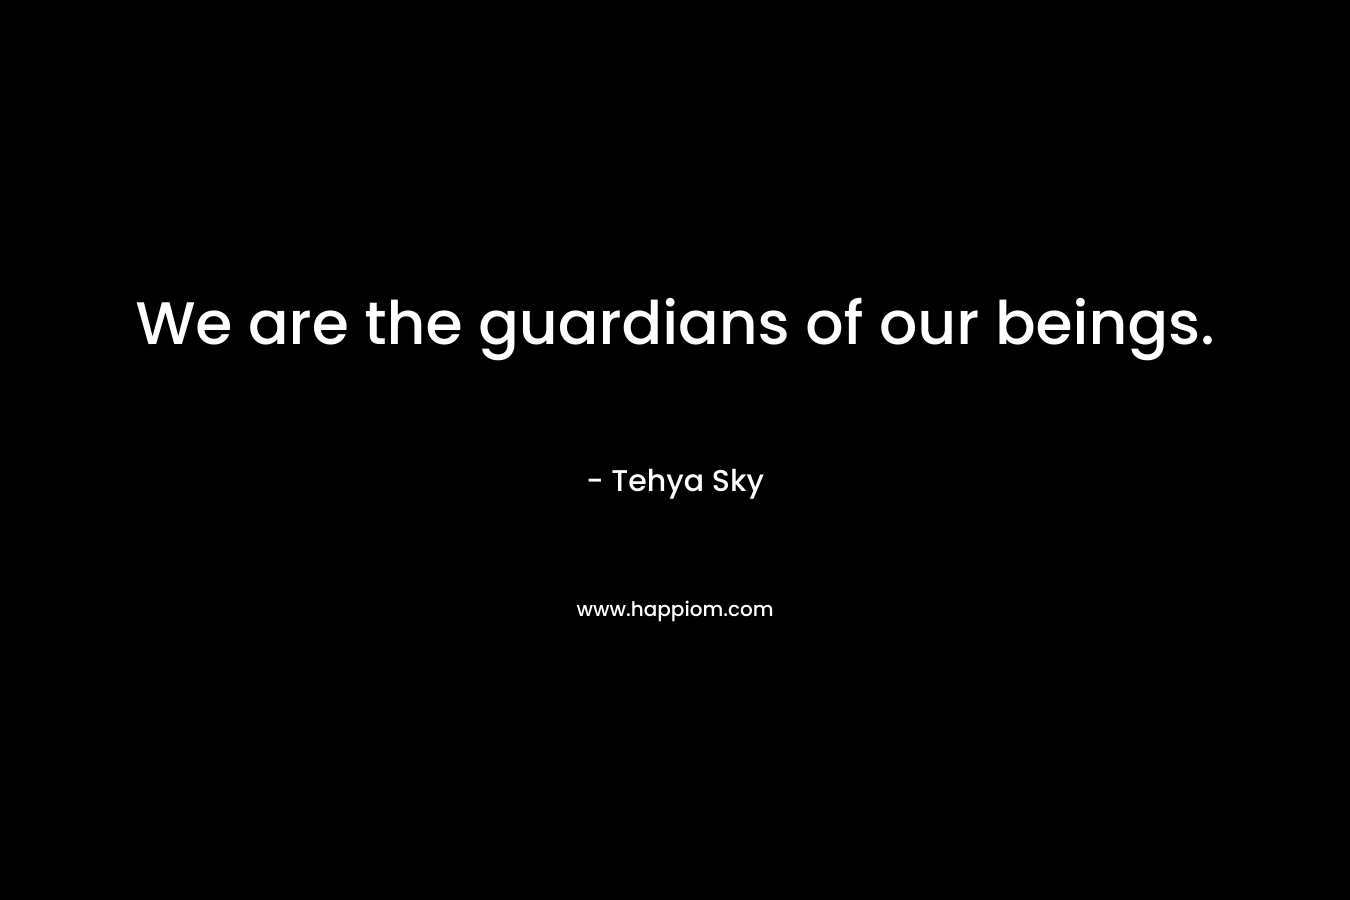 We are the guardians of our beings.